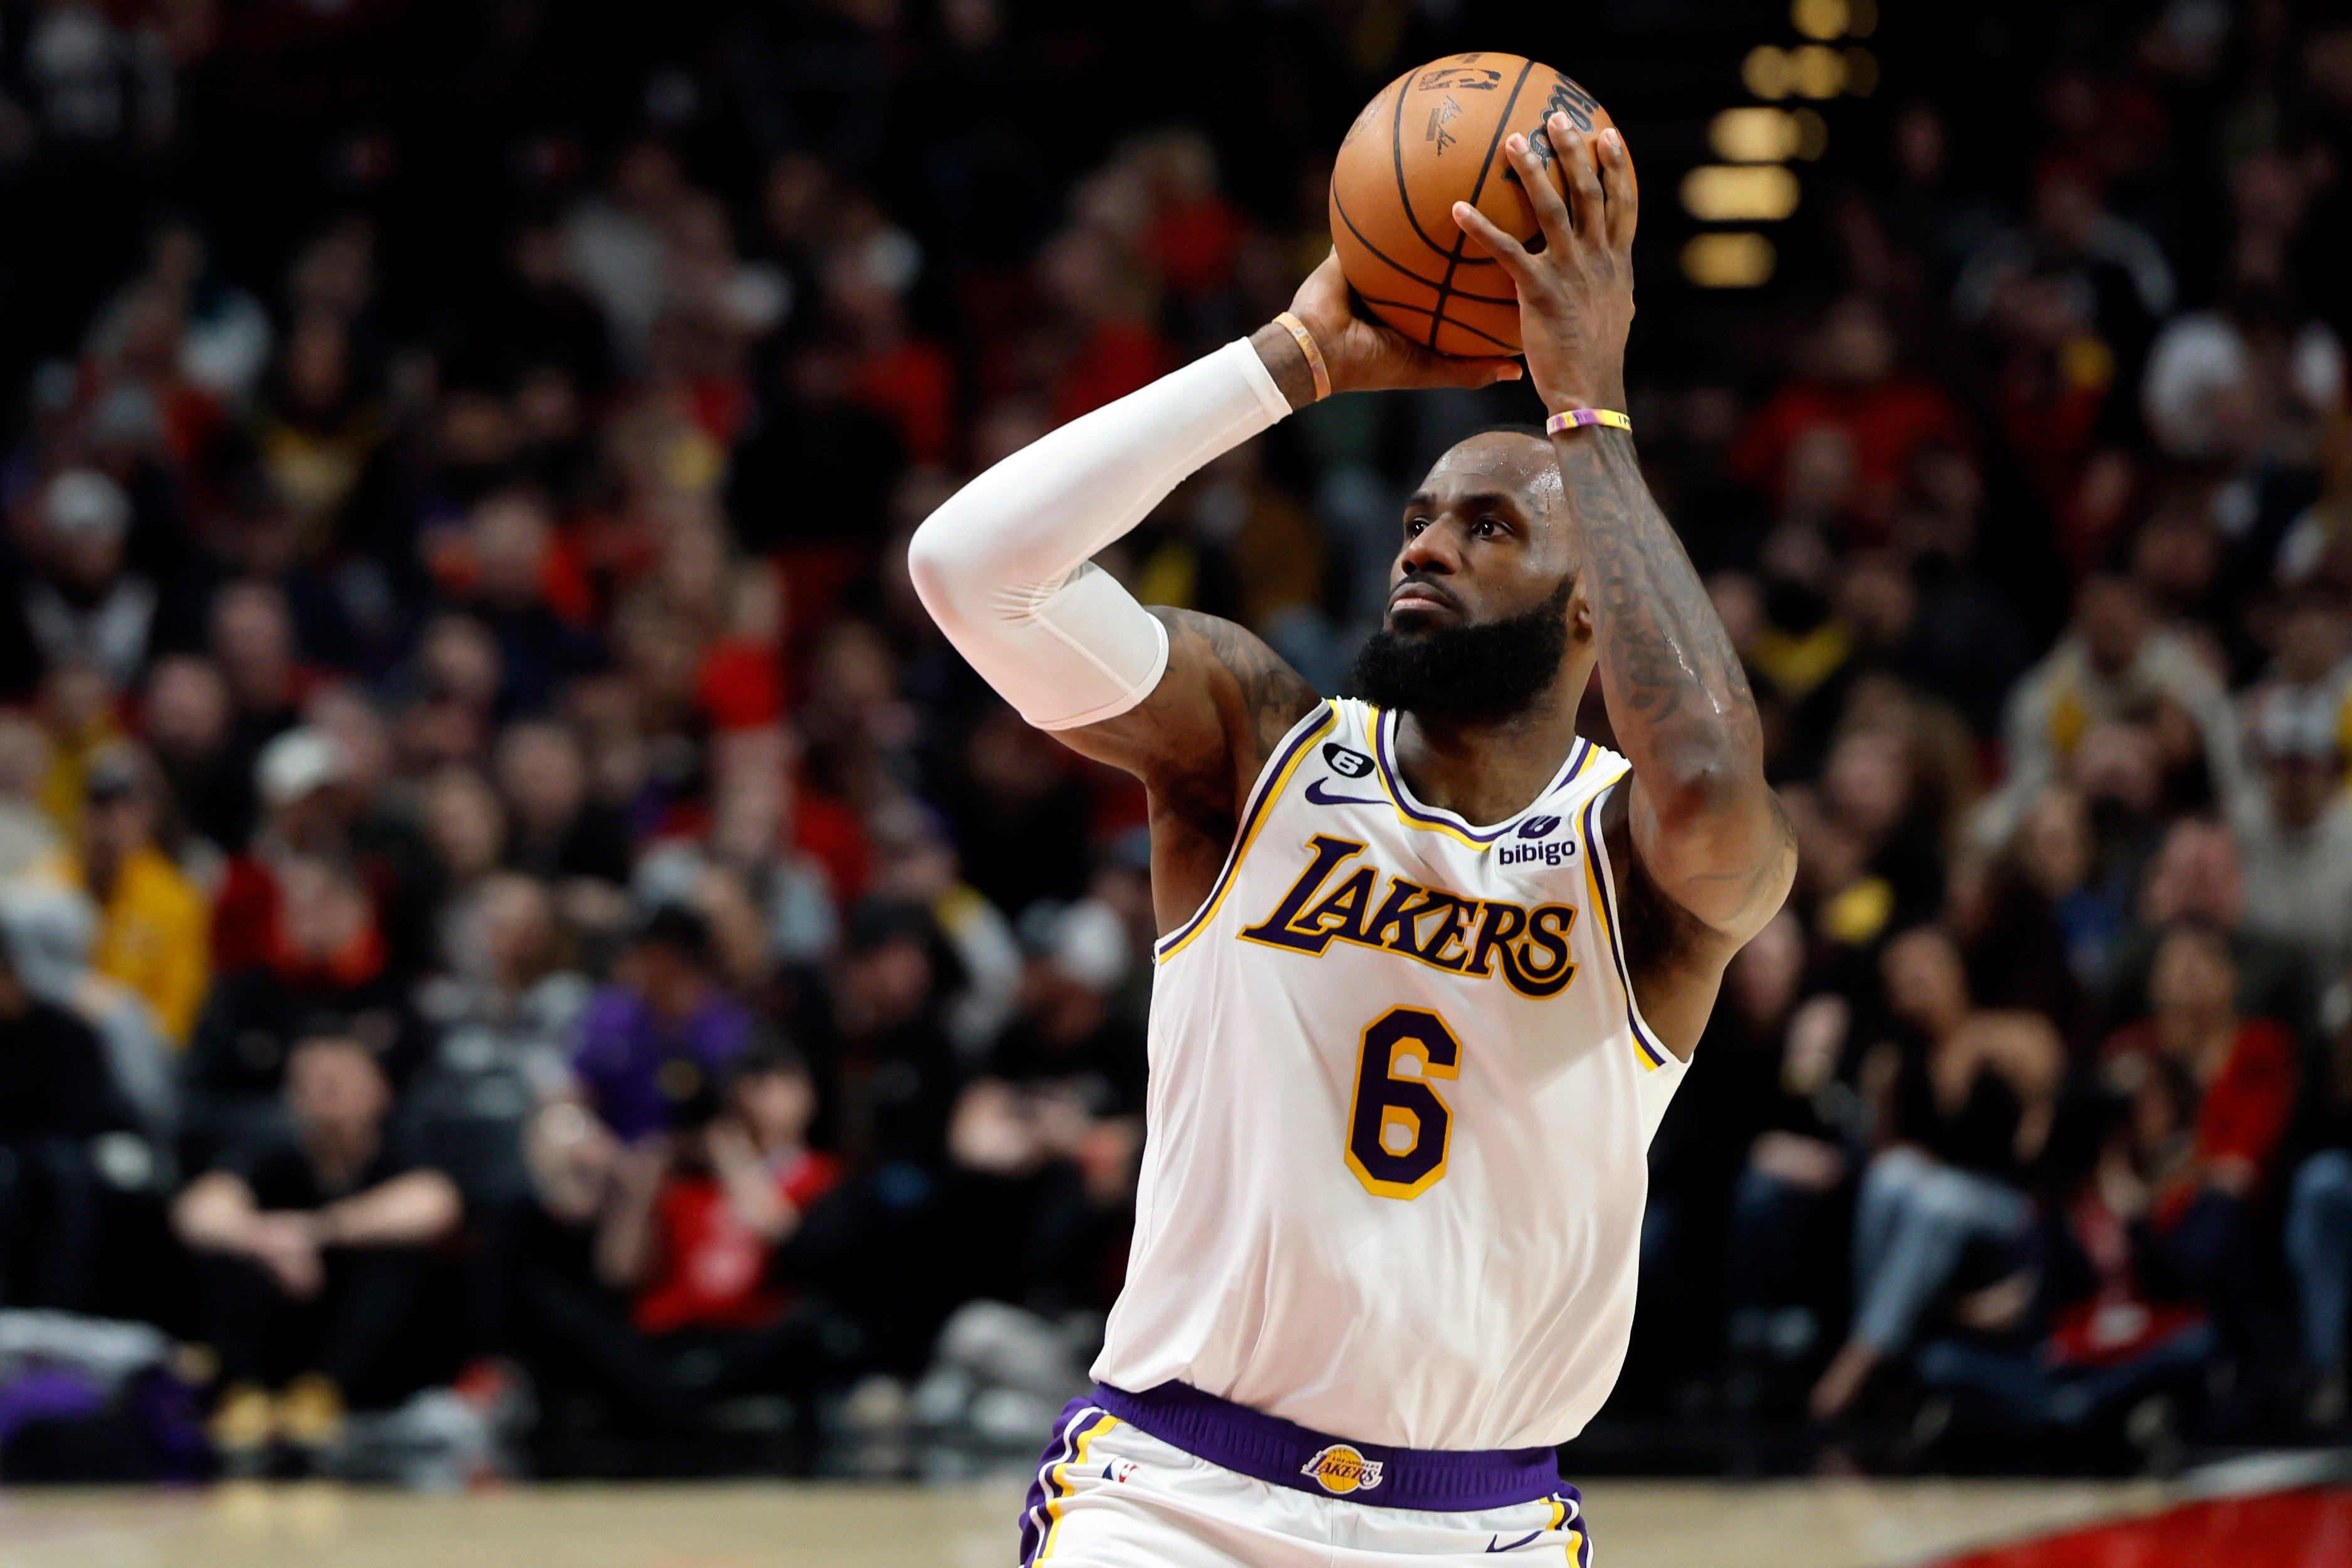 2023 NBA All-Star starters: LeBron James earns 19th selection, joined by Kevin Durant, Nikola Jokic